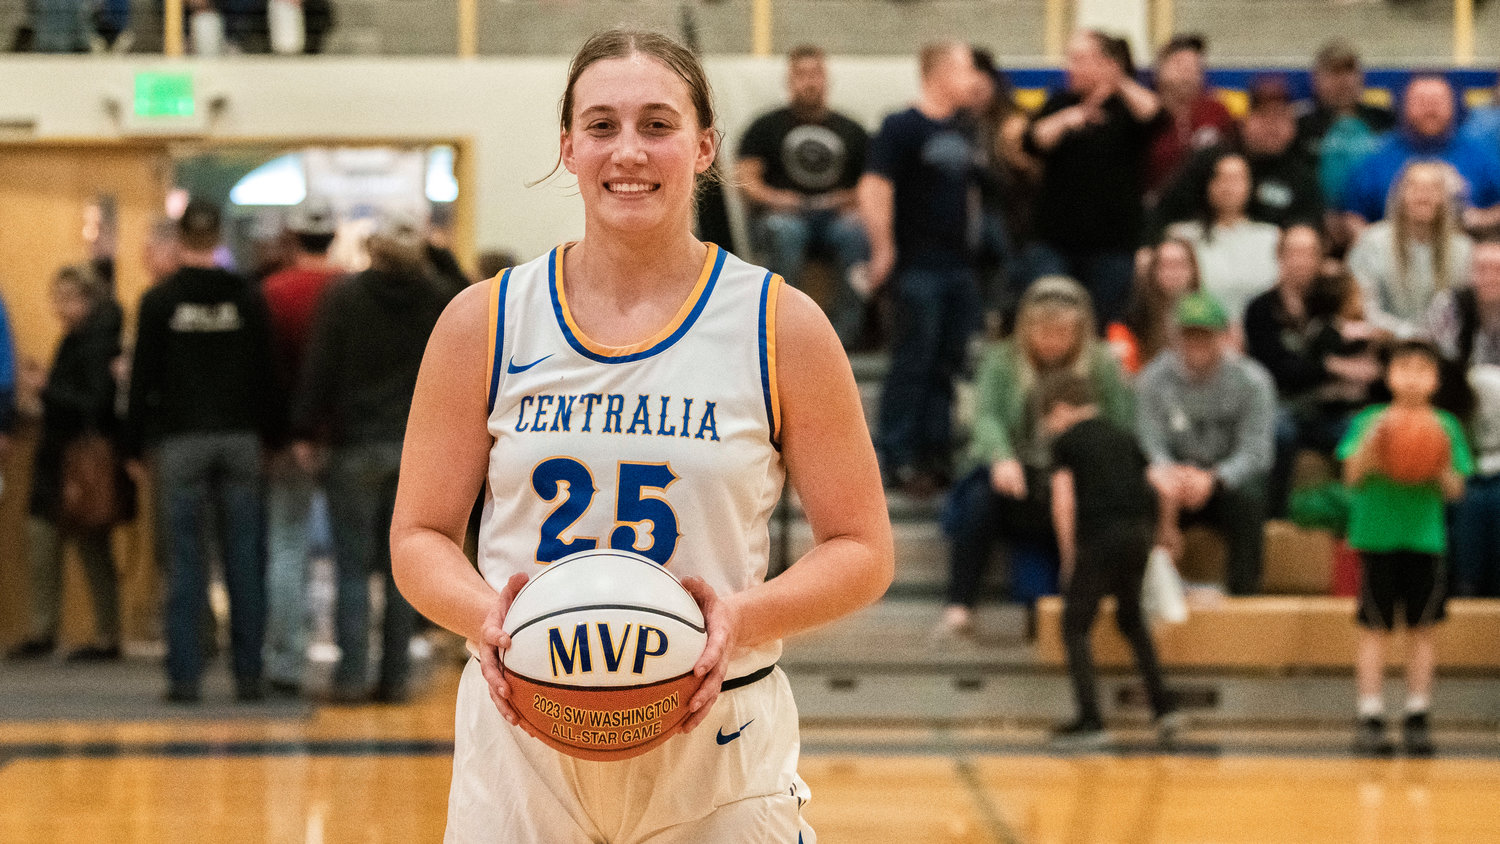 MVP Karlee VonMoos, of Adna, poses for a photo after a Southwest Washington High School All-Star game at Centralia College Friday night.